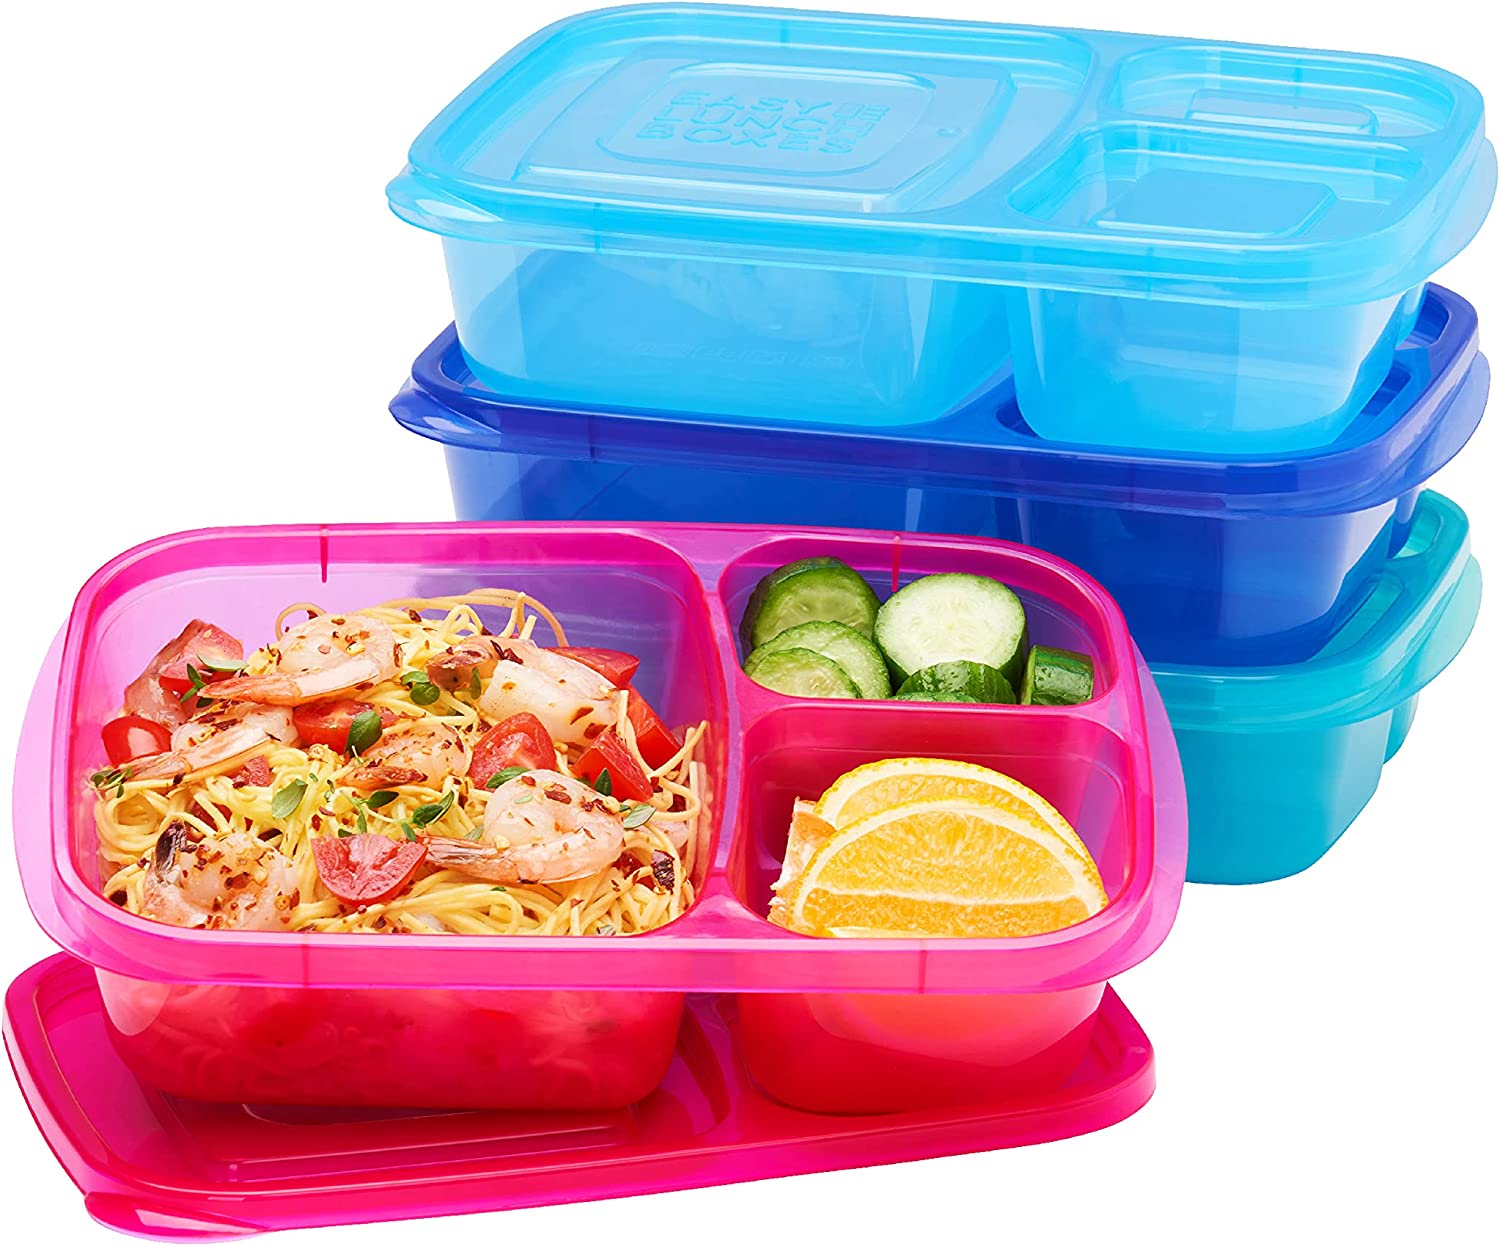 EasyLunchboxes Stackable Bento Lunchbox For Girls, 4-Pack